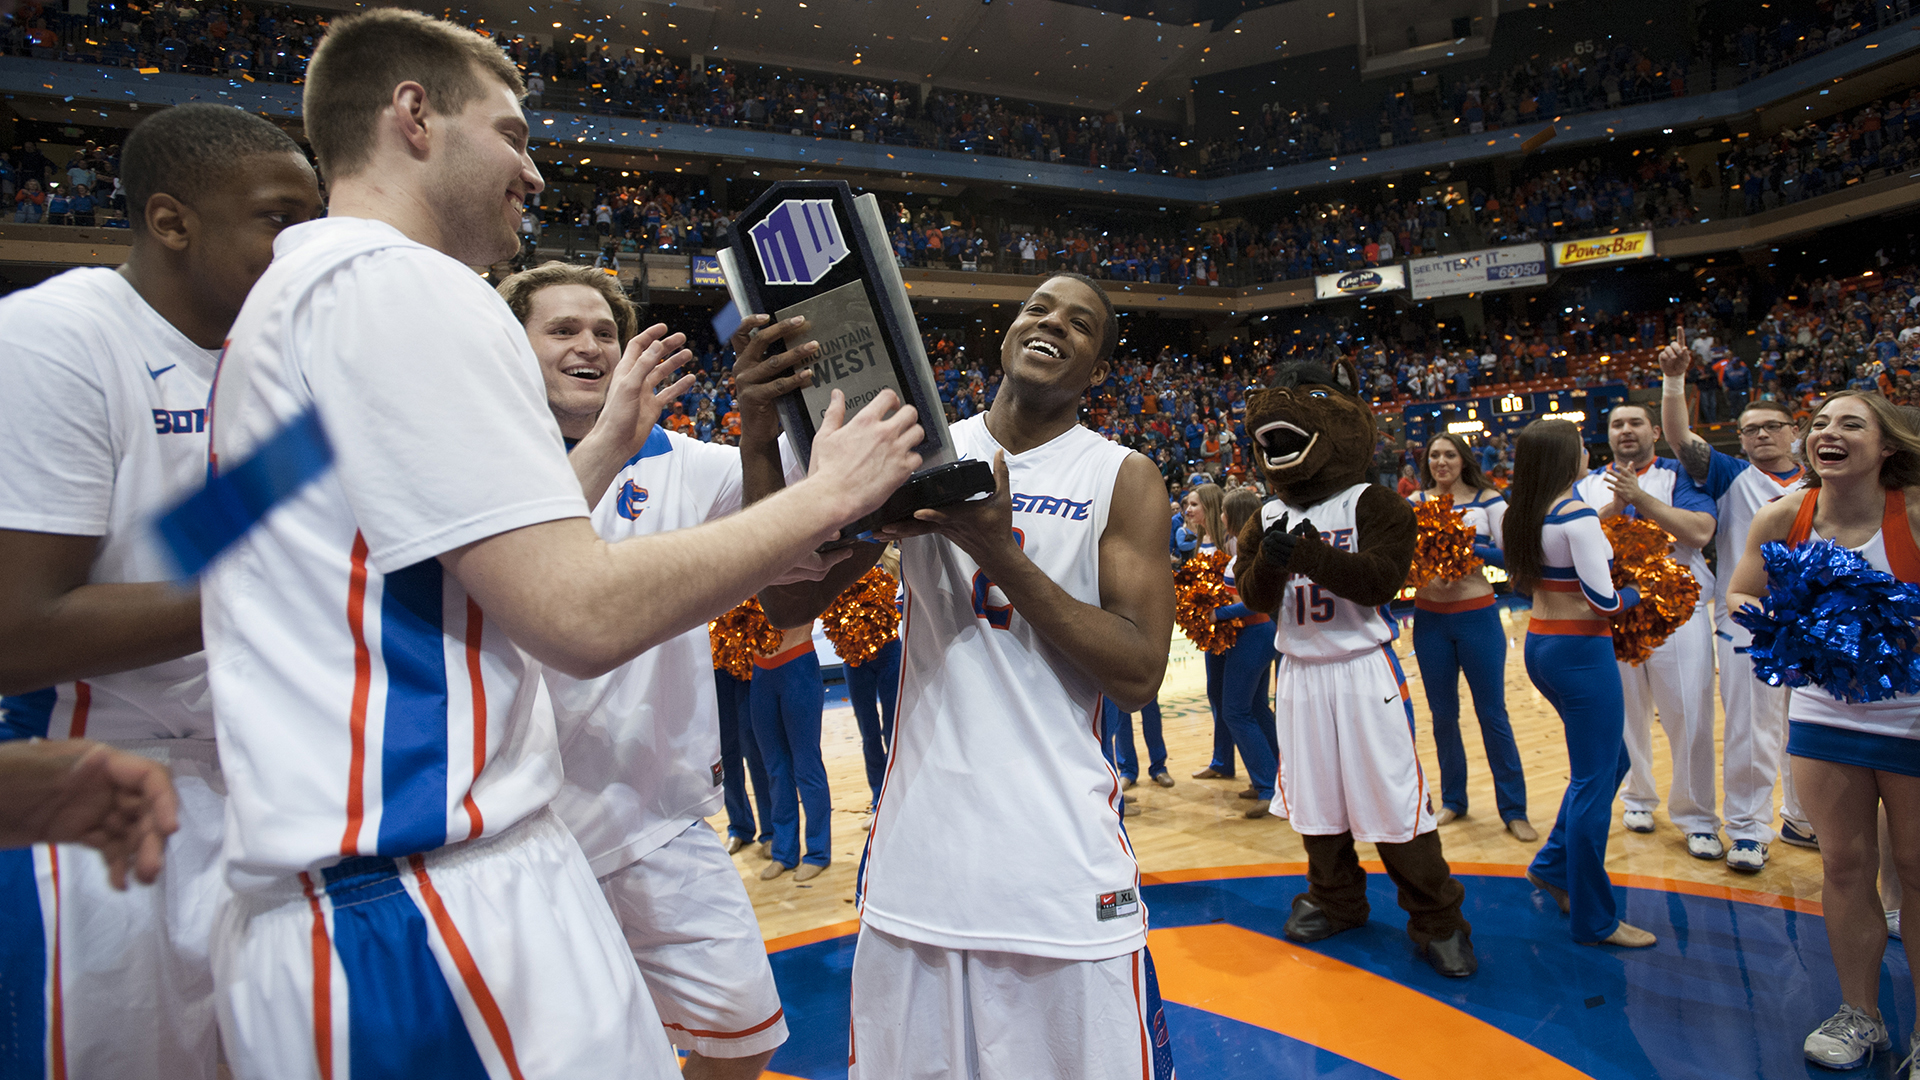 2015: Boise State Basketball wins Mountain West Conference